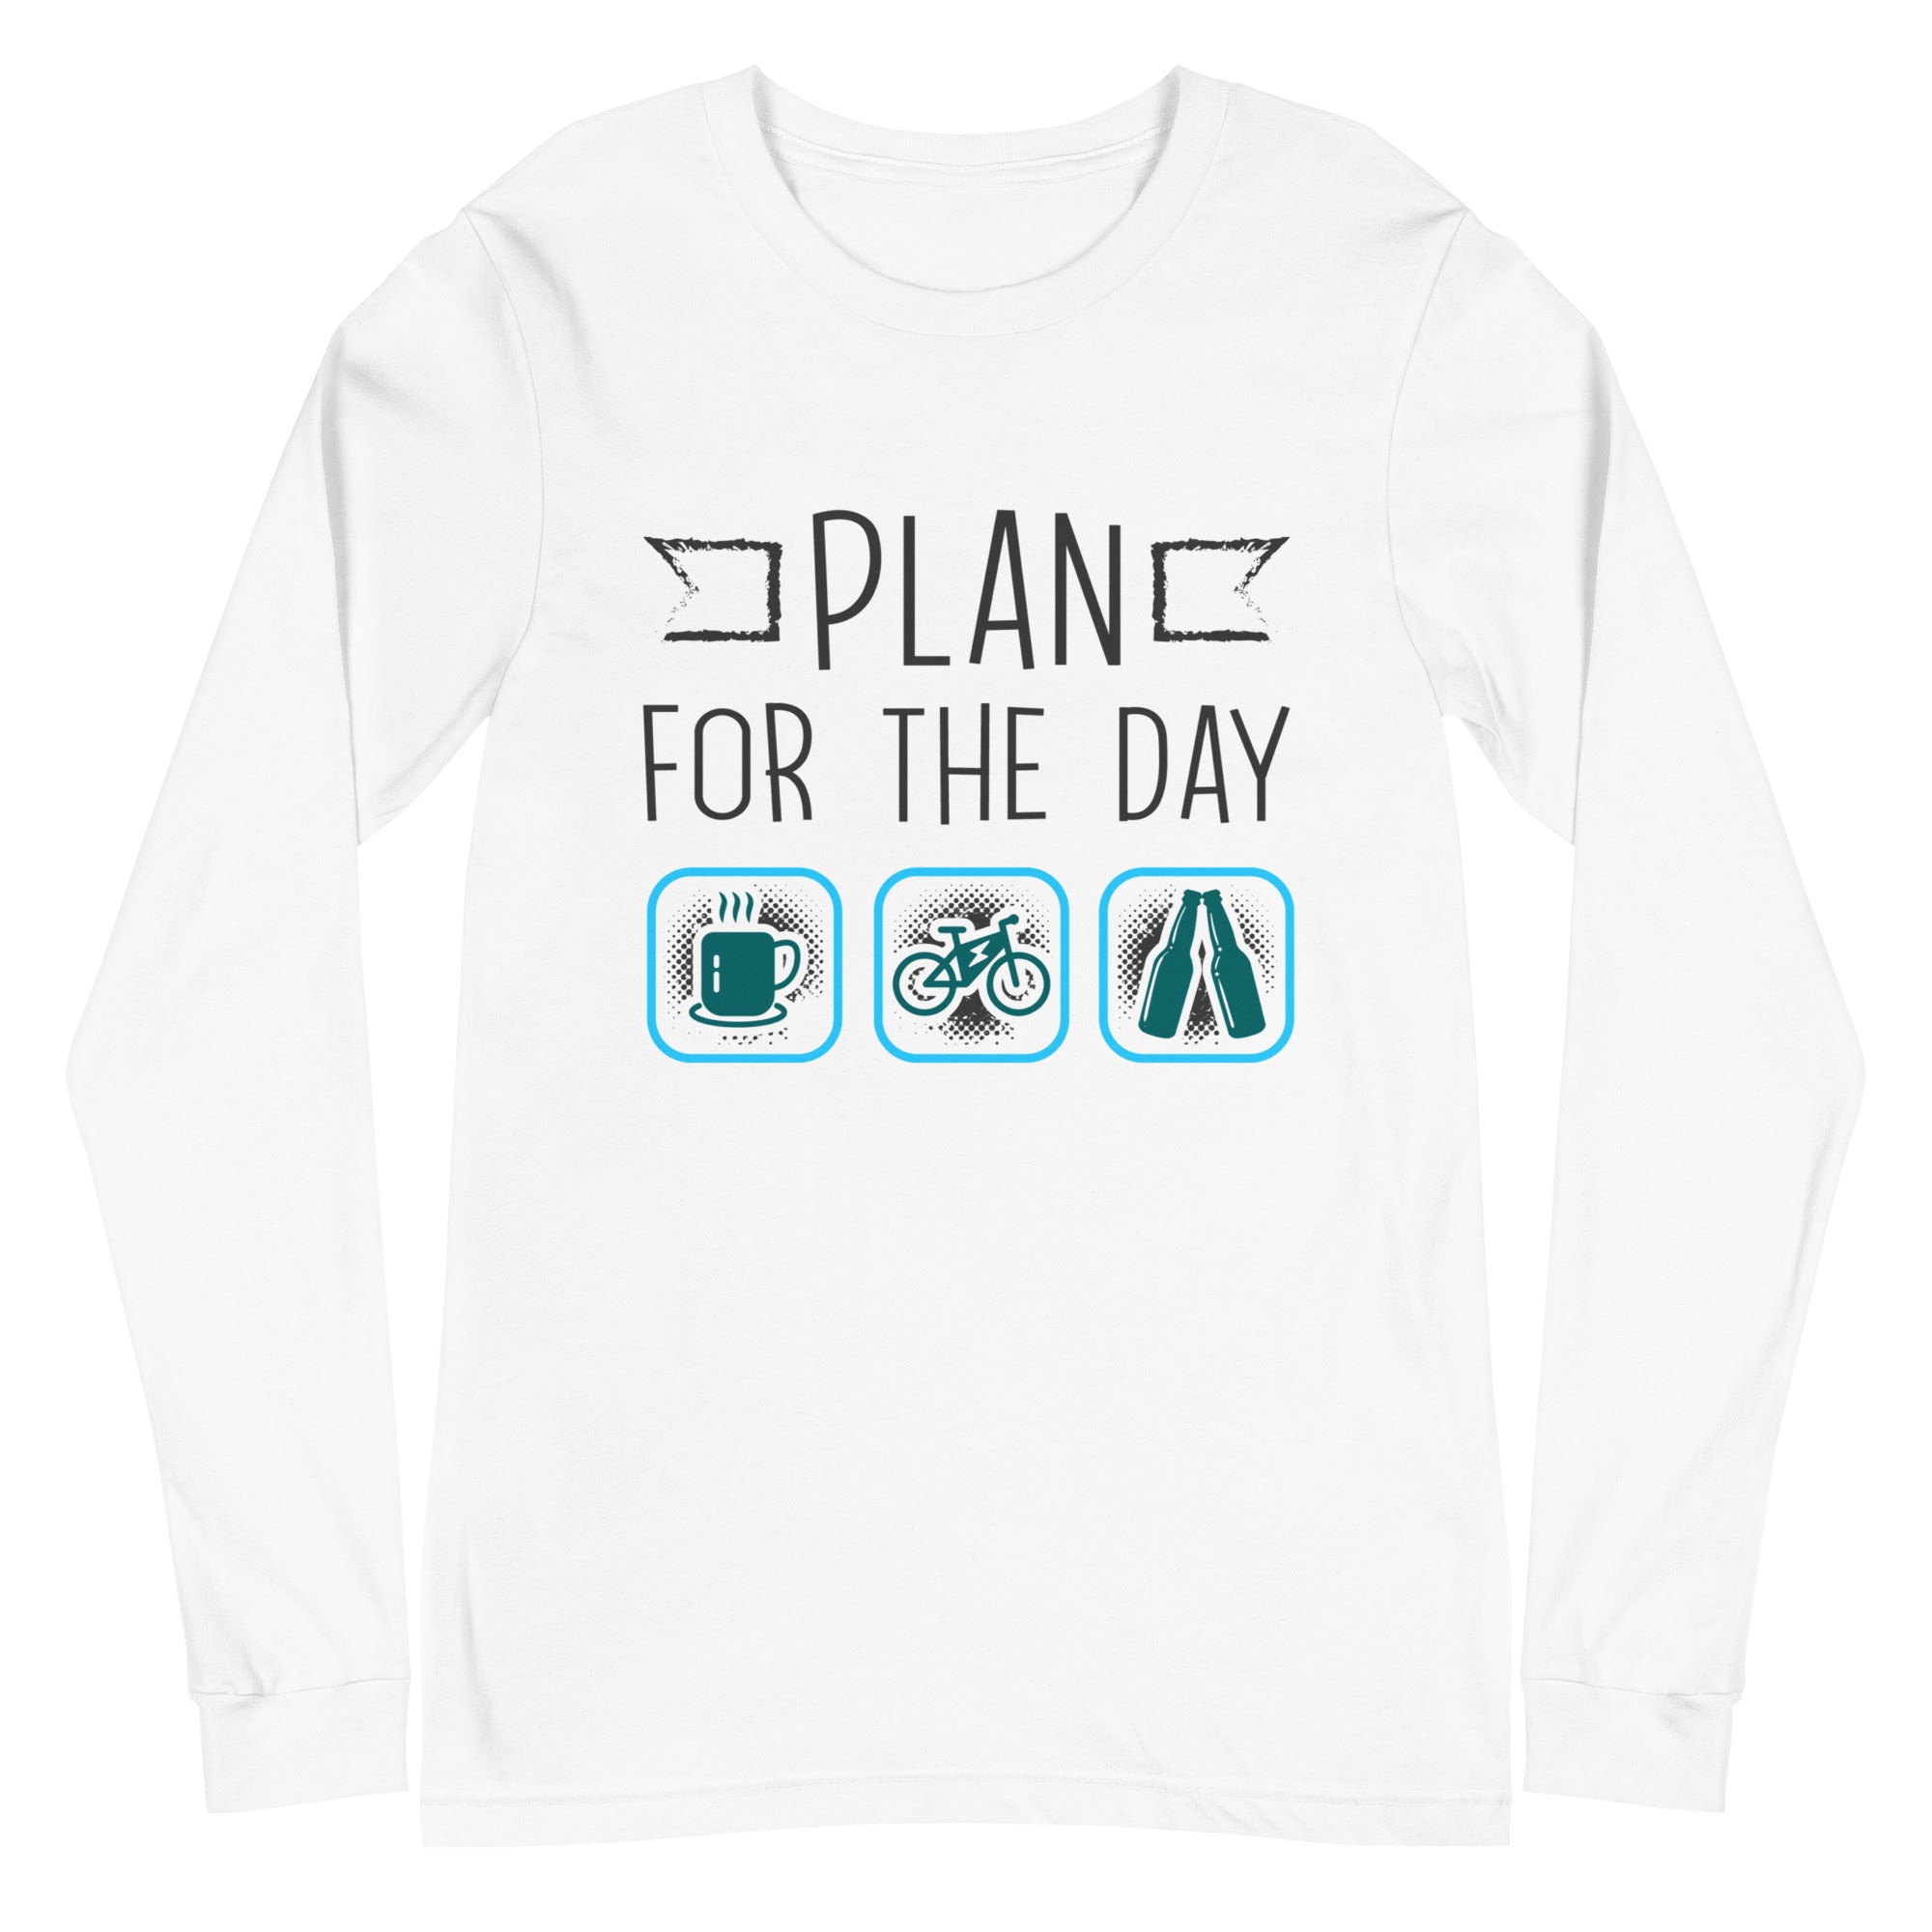 Plan for the Day "Coffee, E-bike, Beer" Bella + Canvas 3501 Women's Long Sleeve Tee White